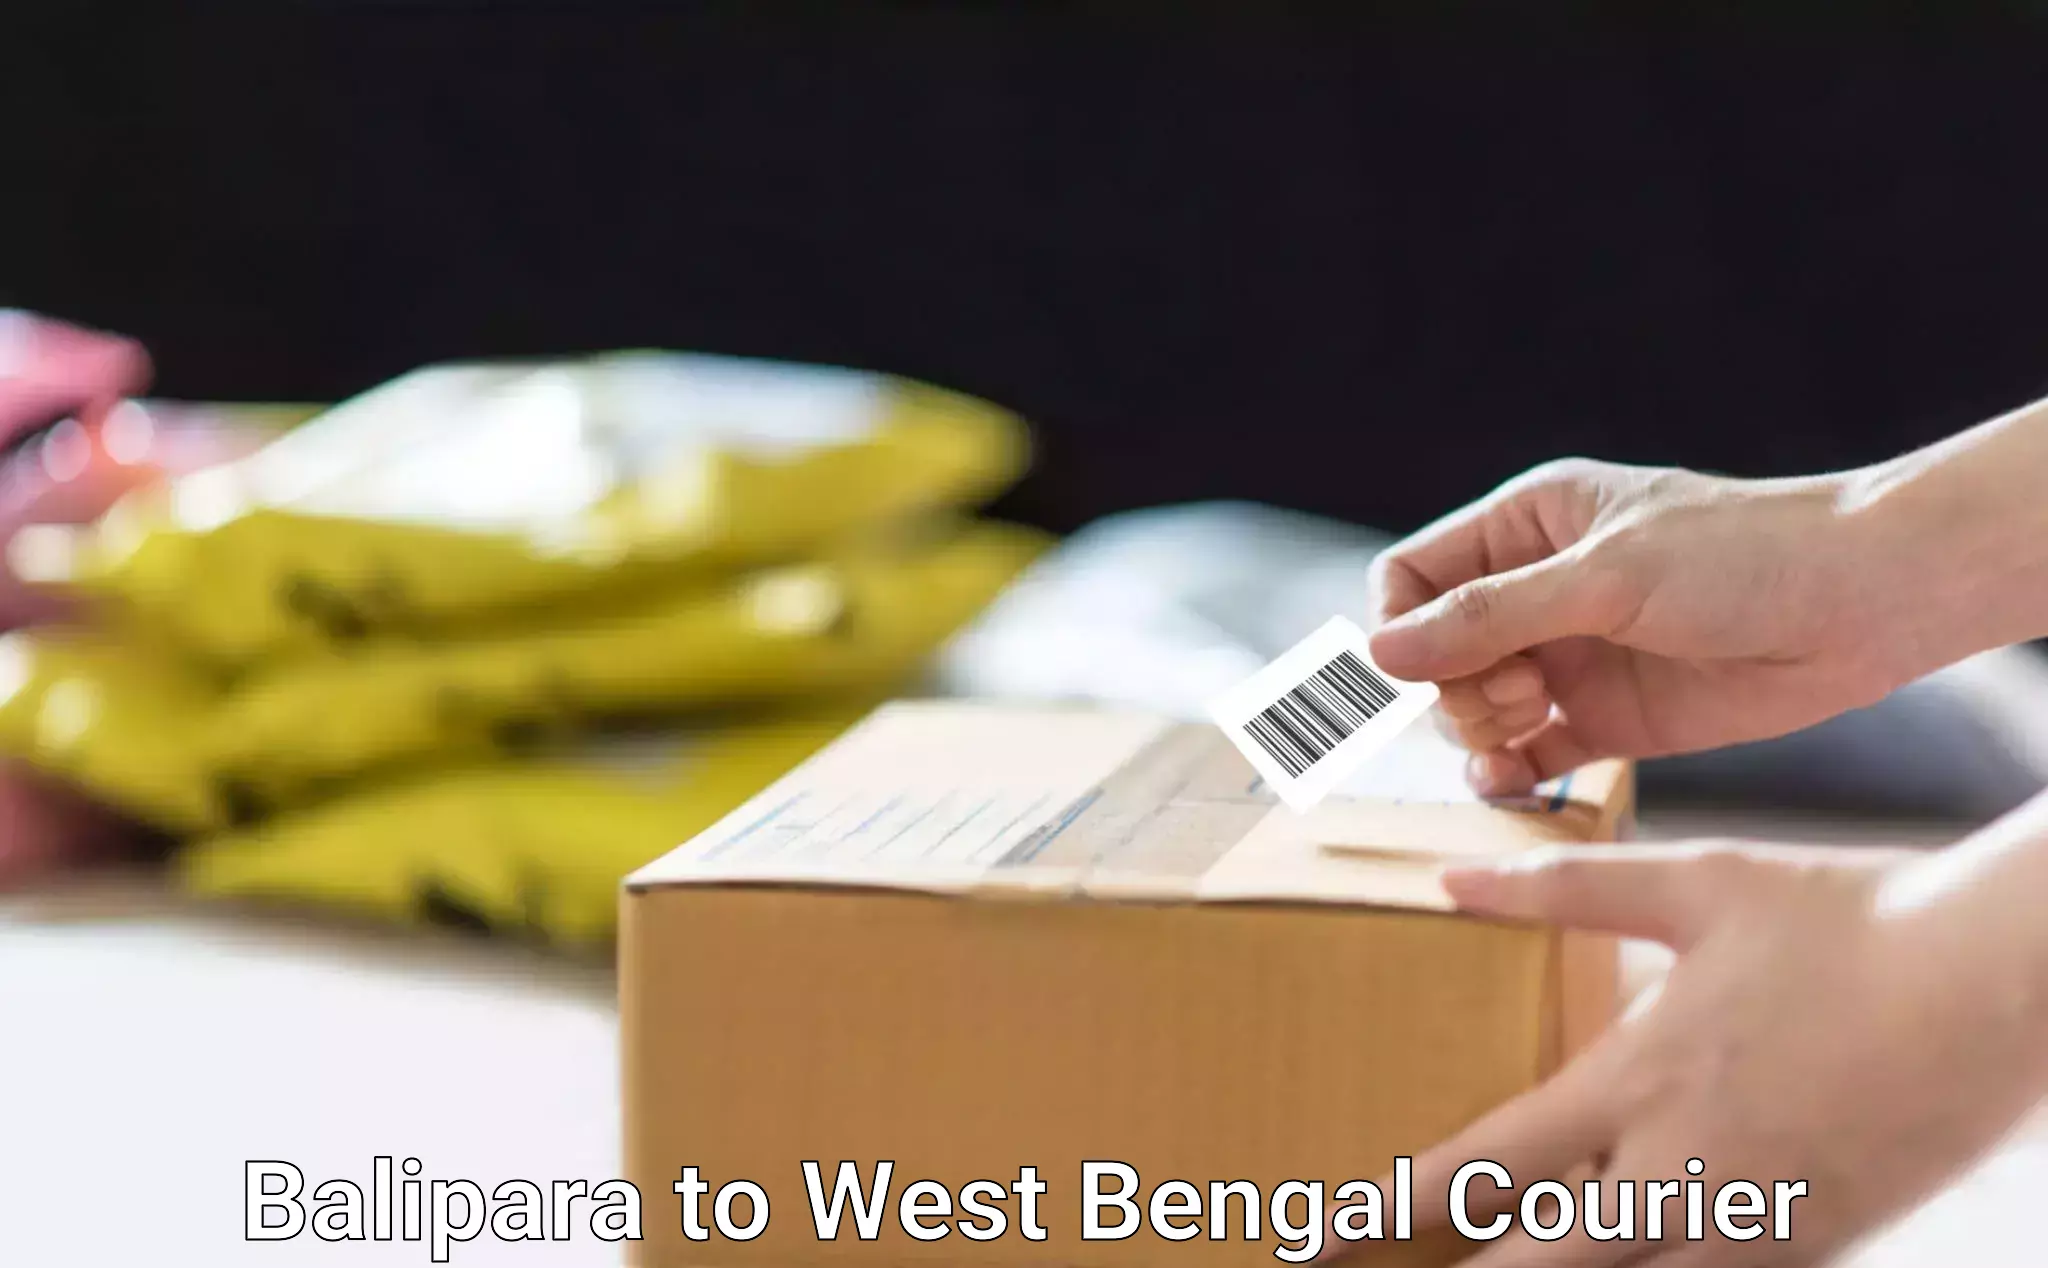 Customer-centric shipping Balipara to West Bengal